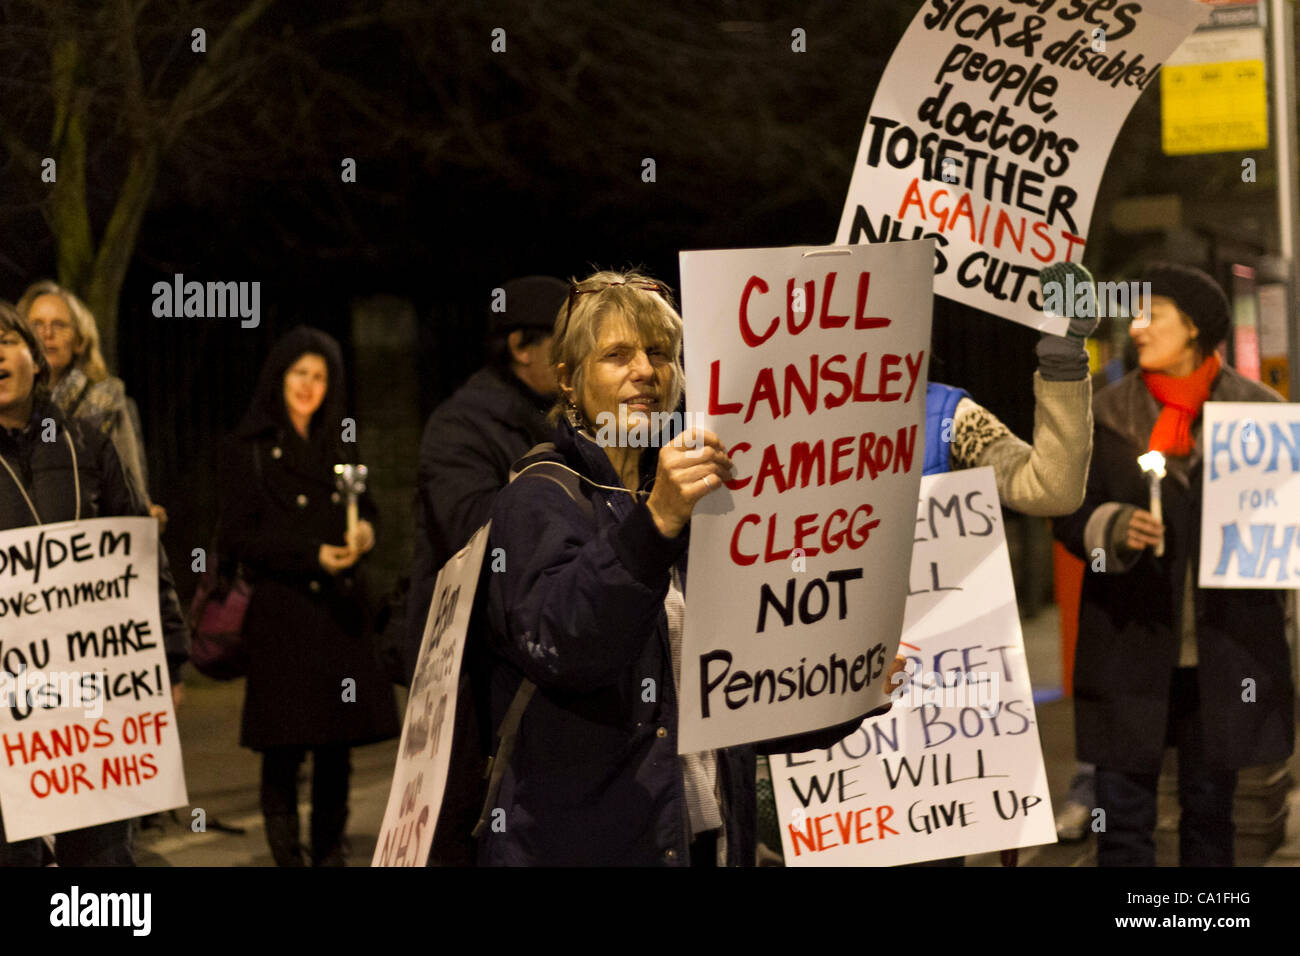 London, UK. 19/03/12. Protesters held  'Drop the NHS bill' candlelit vigil at Lambeth Palace Gardens park entrance. The proposes NHS Bill is to create a independent NHS Board, promote patient choice, and to reduce NHS administration costs. Stock Photo